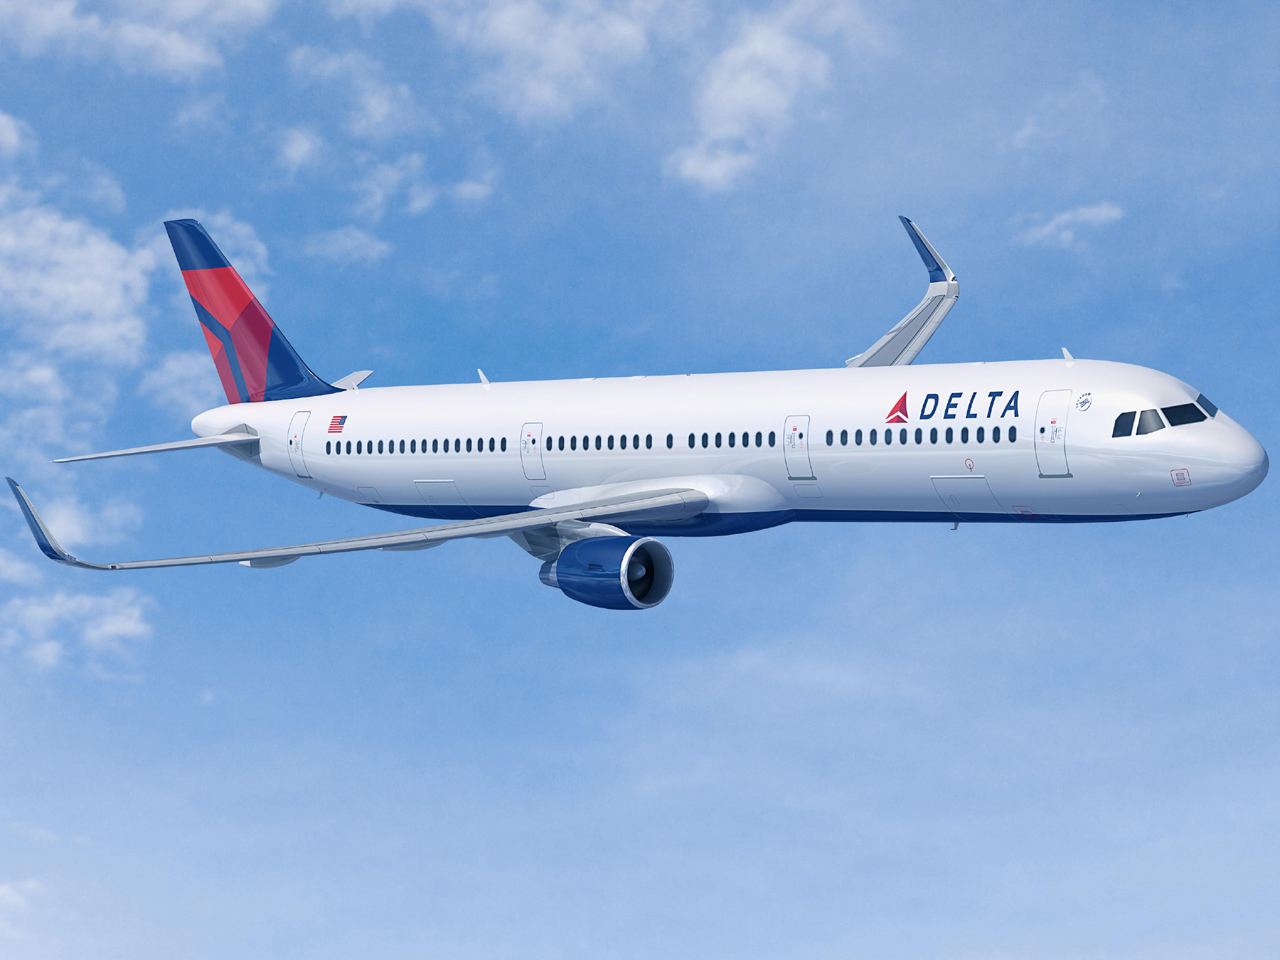 Delta orders 15 new Airbus planes CBS News